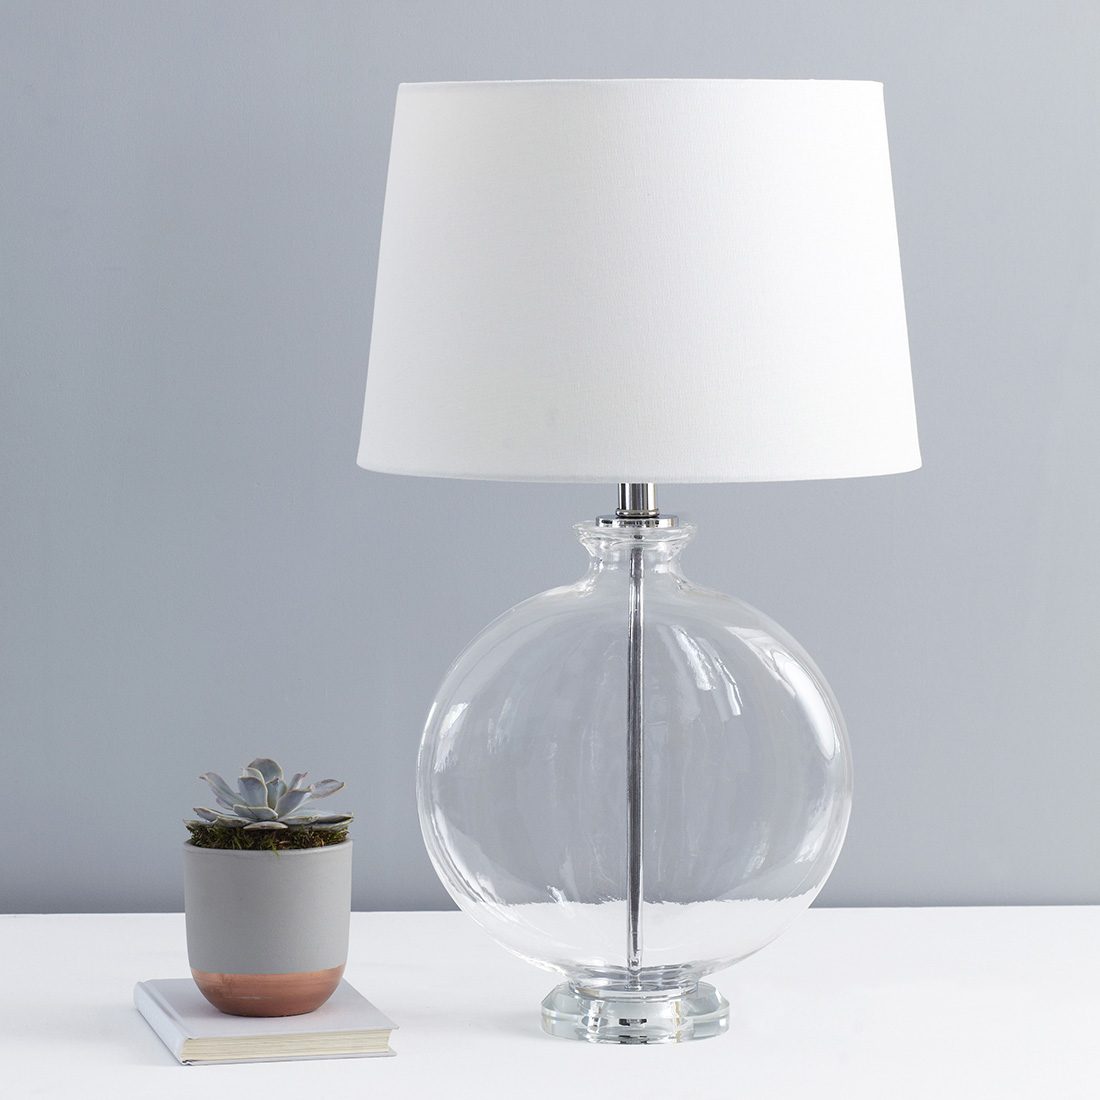 Slim Round Glass Table Lamp With White, Round Glass Table Lamp Uk